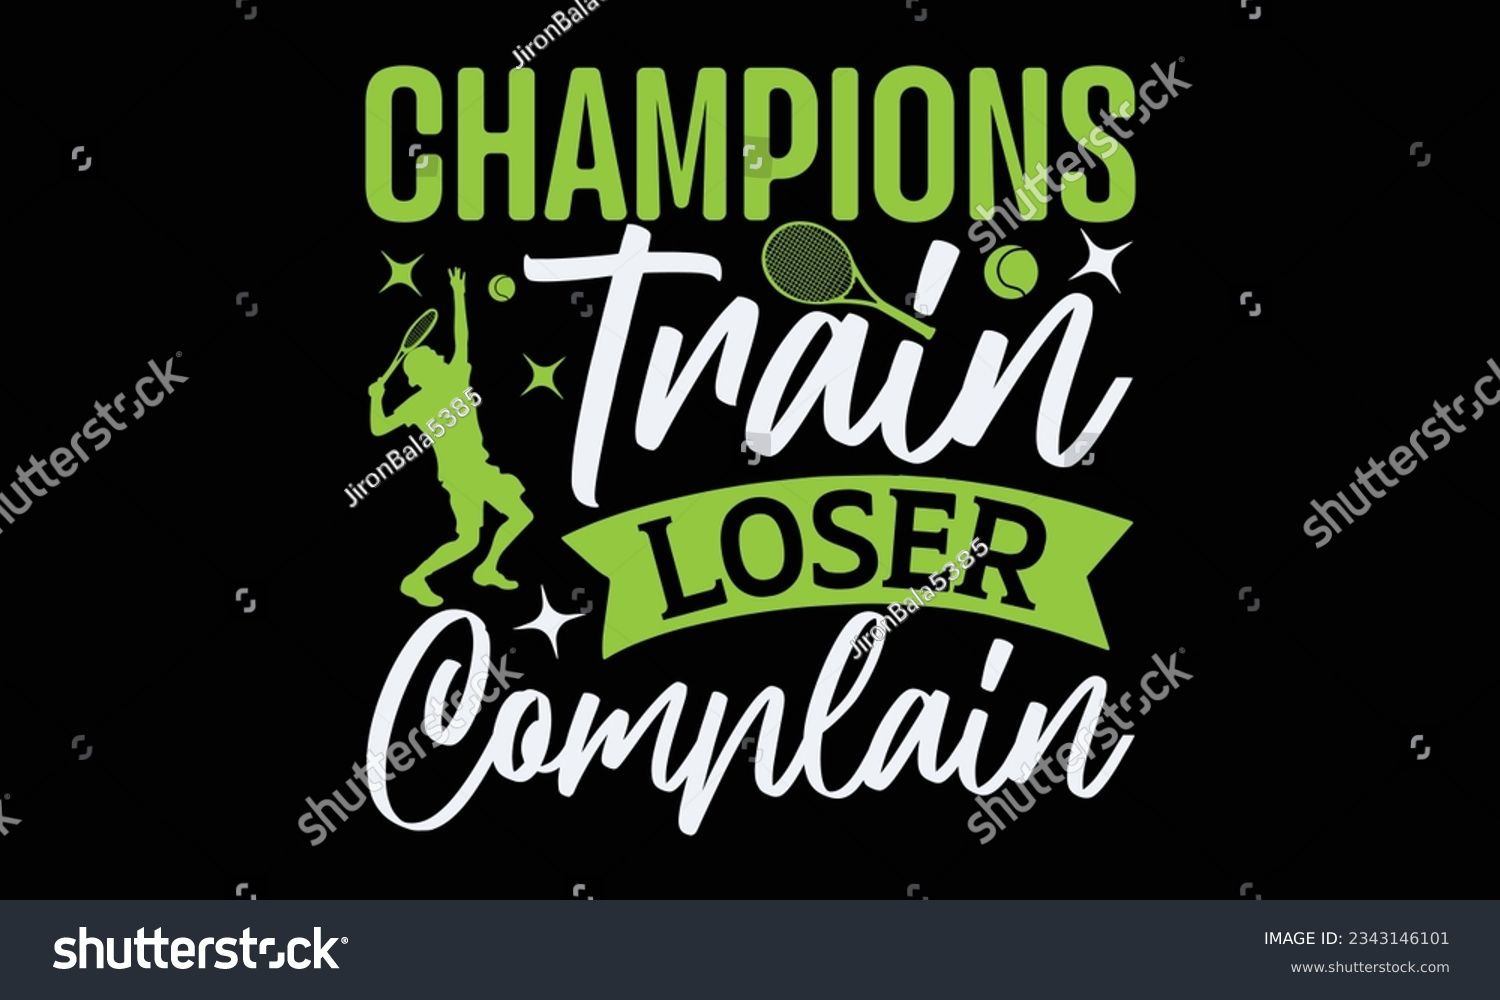 SVG of Champions train losers complain - Tennis t-shirt design, Hand drawn lettering phrase, Illustration for prints on SVG , bags, posters, template, cards and Mug. svg